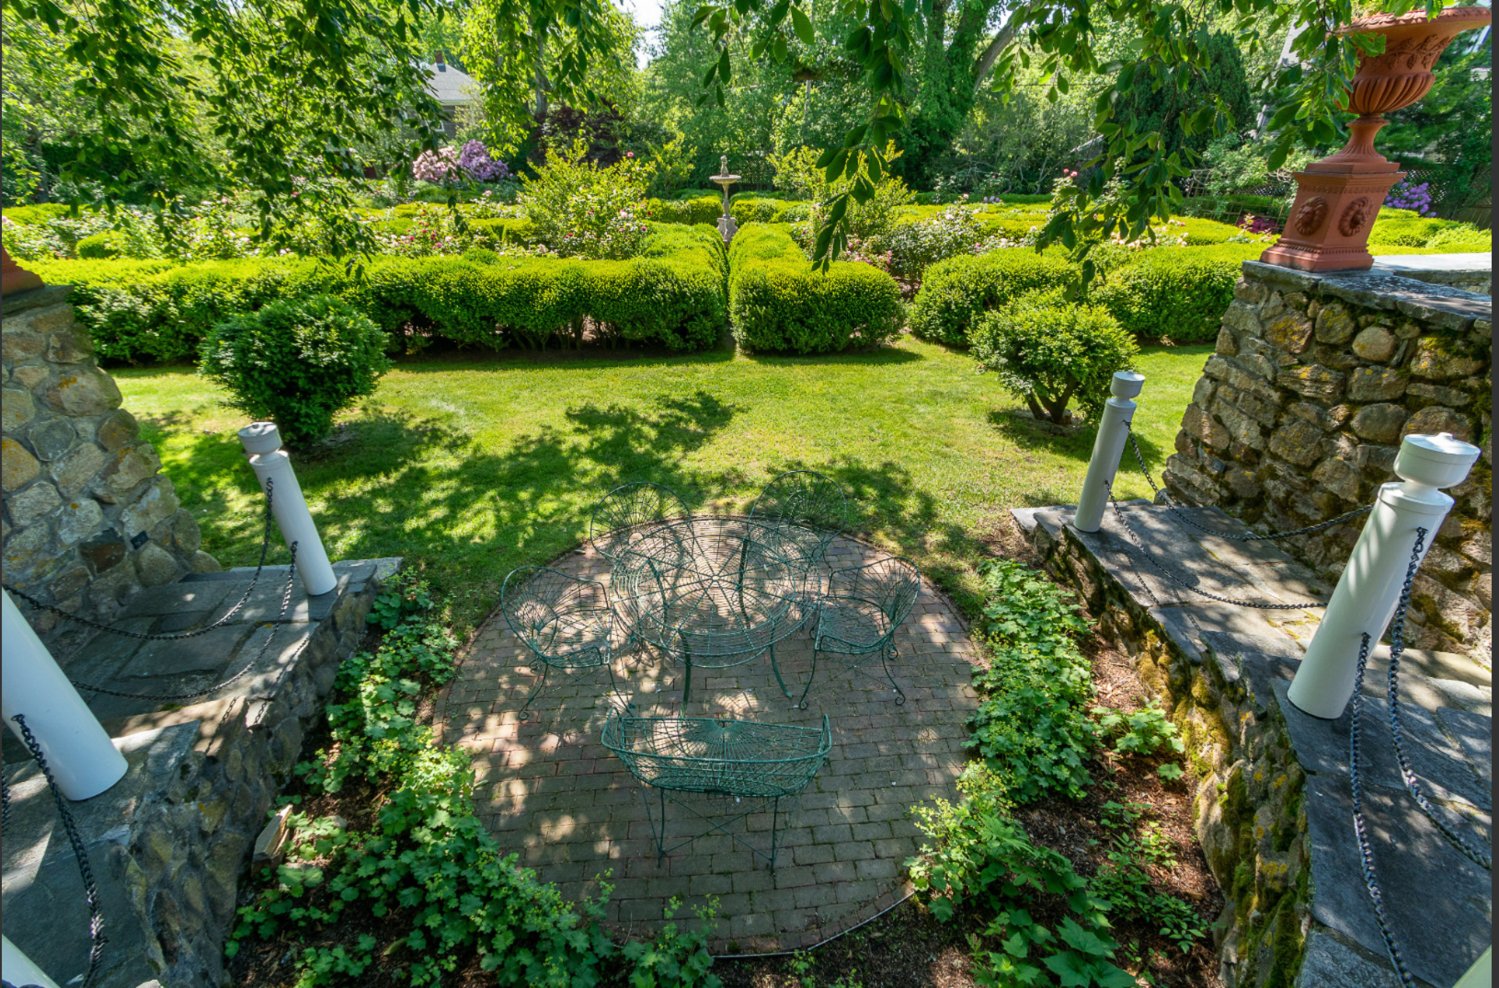 The formal gardens are surrounded by a brick wall to provide the utmost privacy.